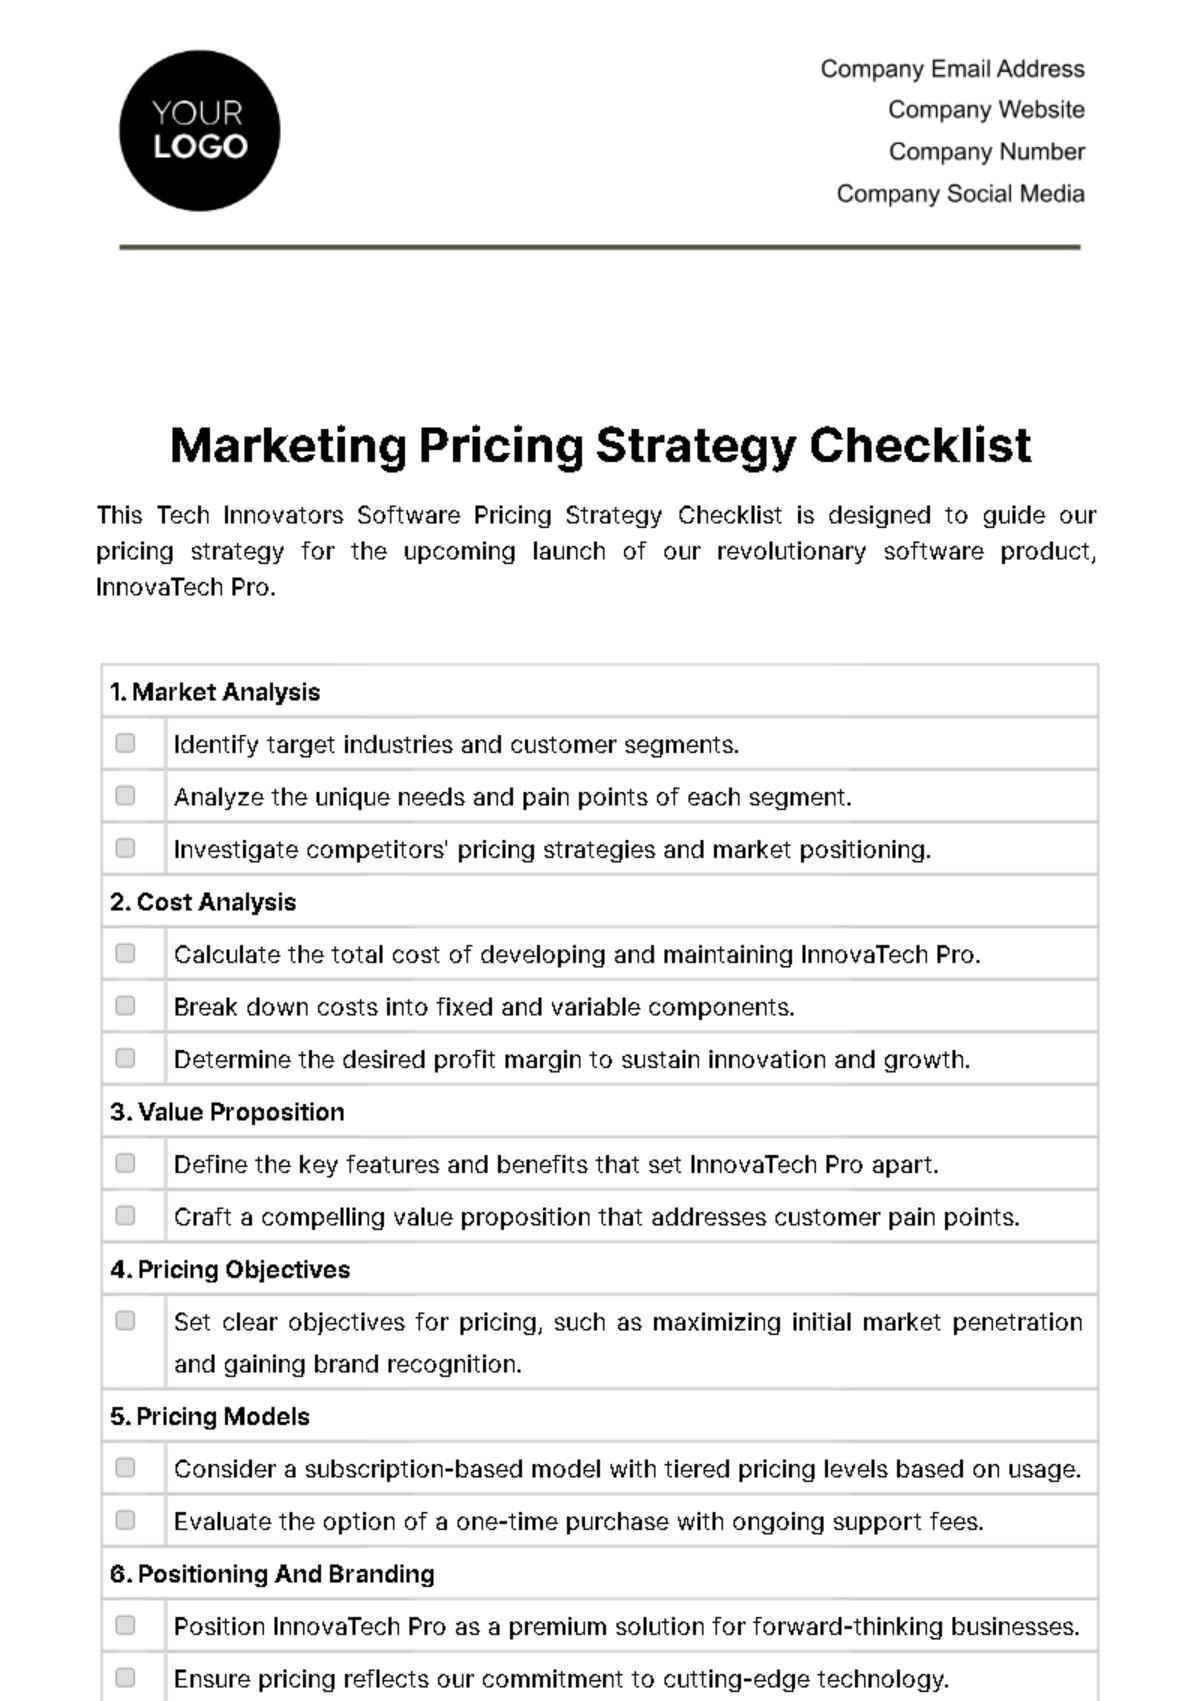 Marketing Pricing Strategy Checklist Template